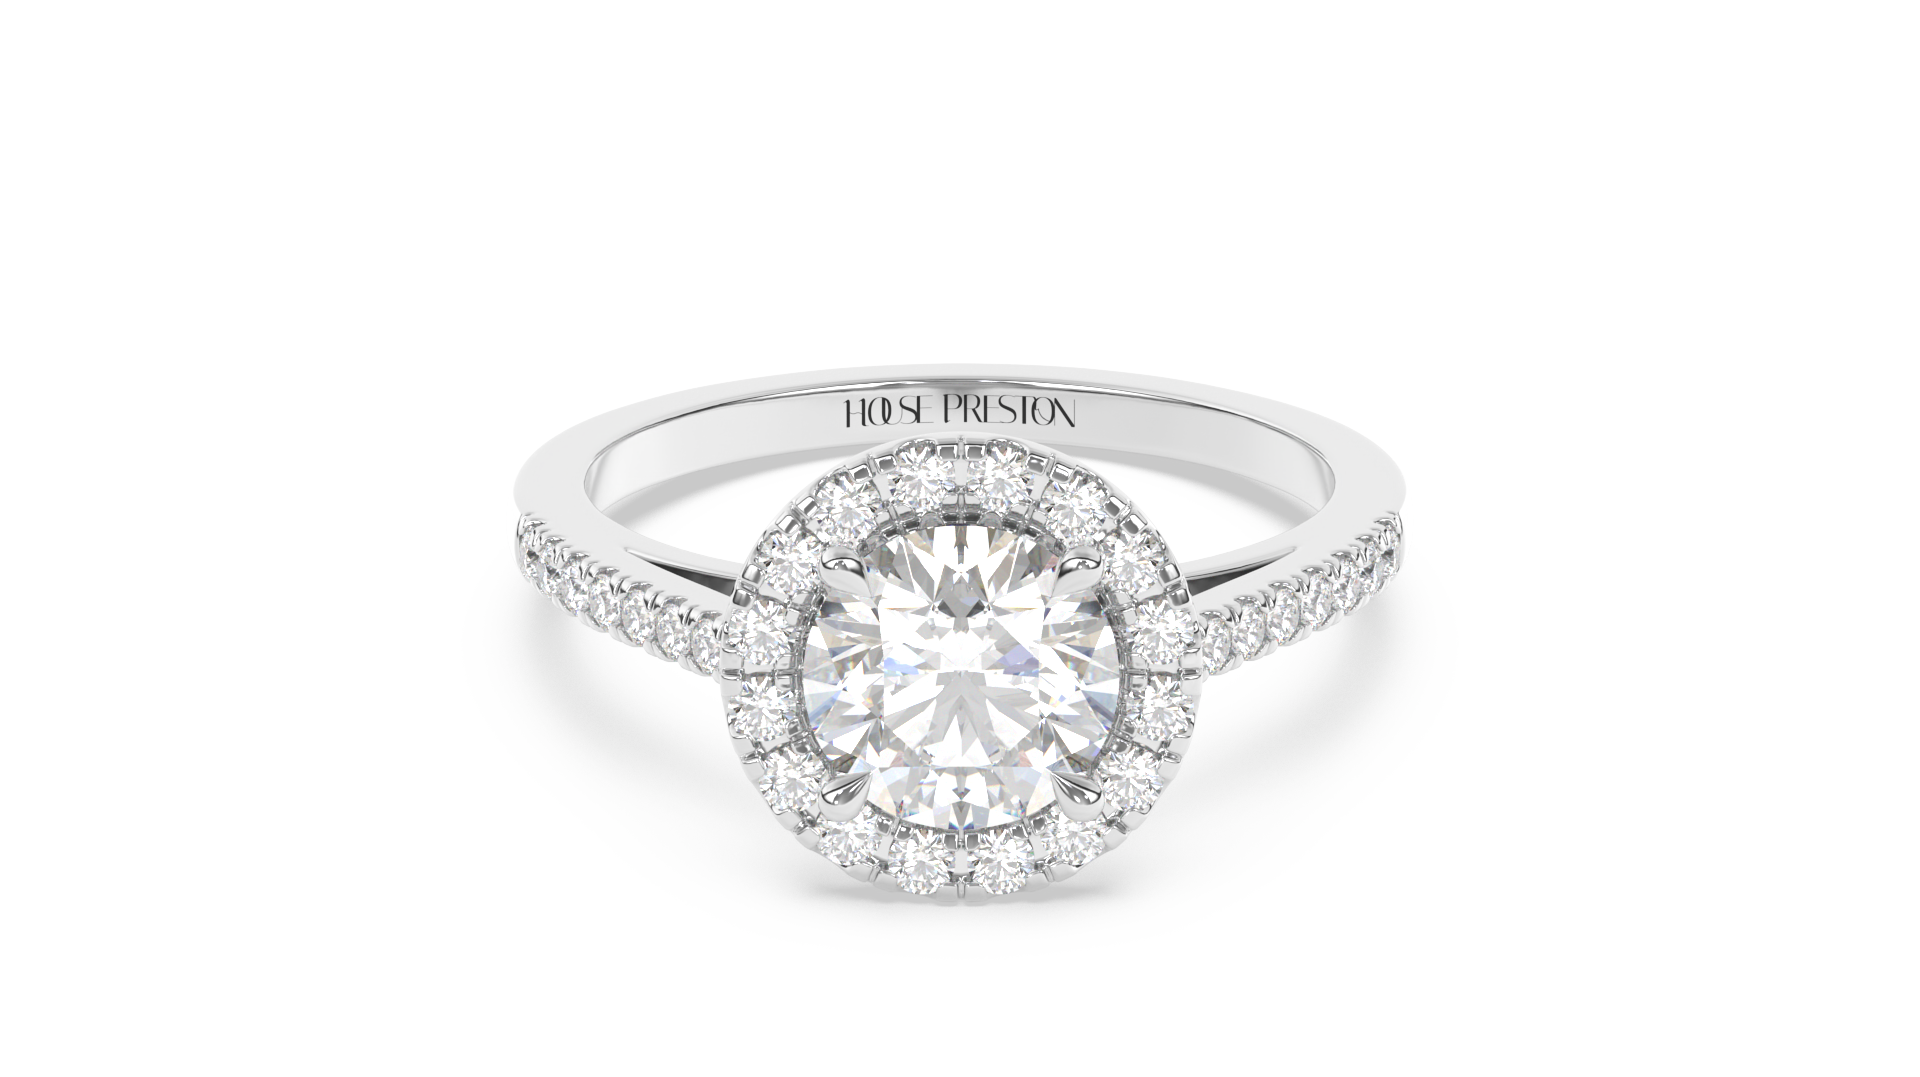 The Signature Oval Halo Ring Setting